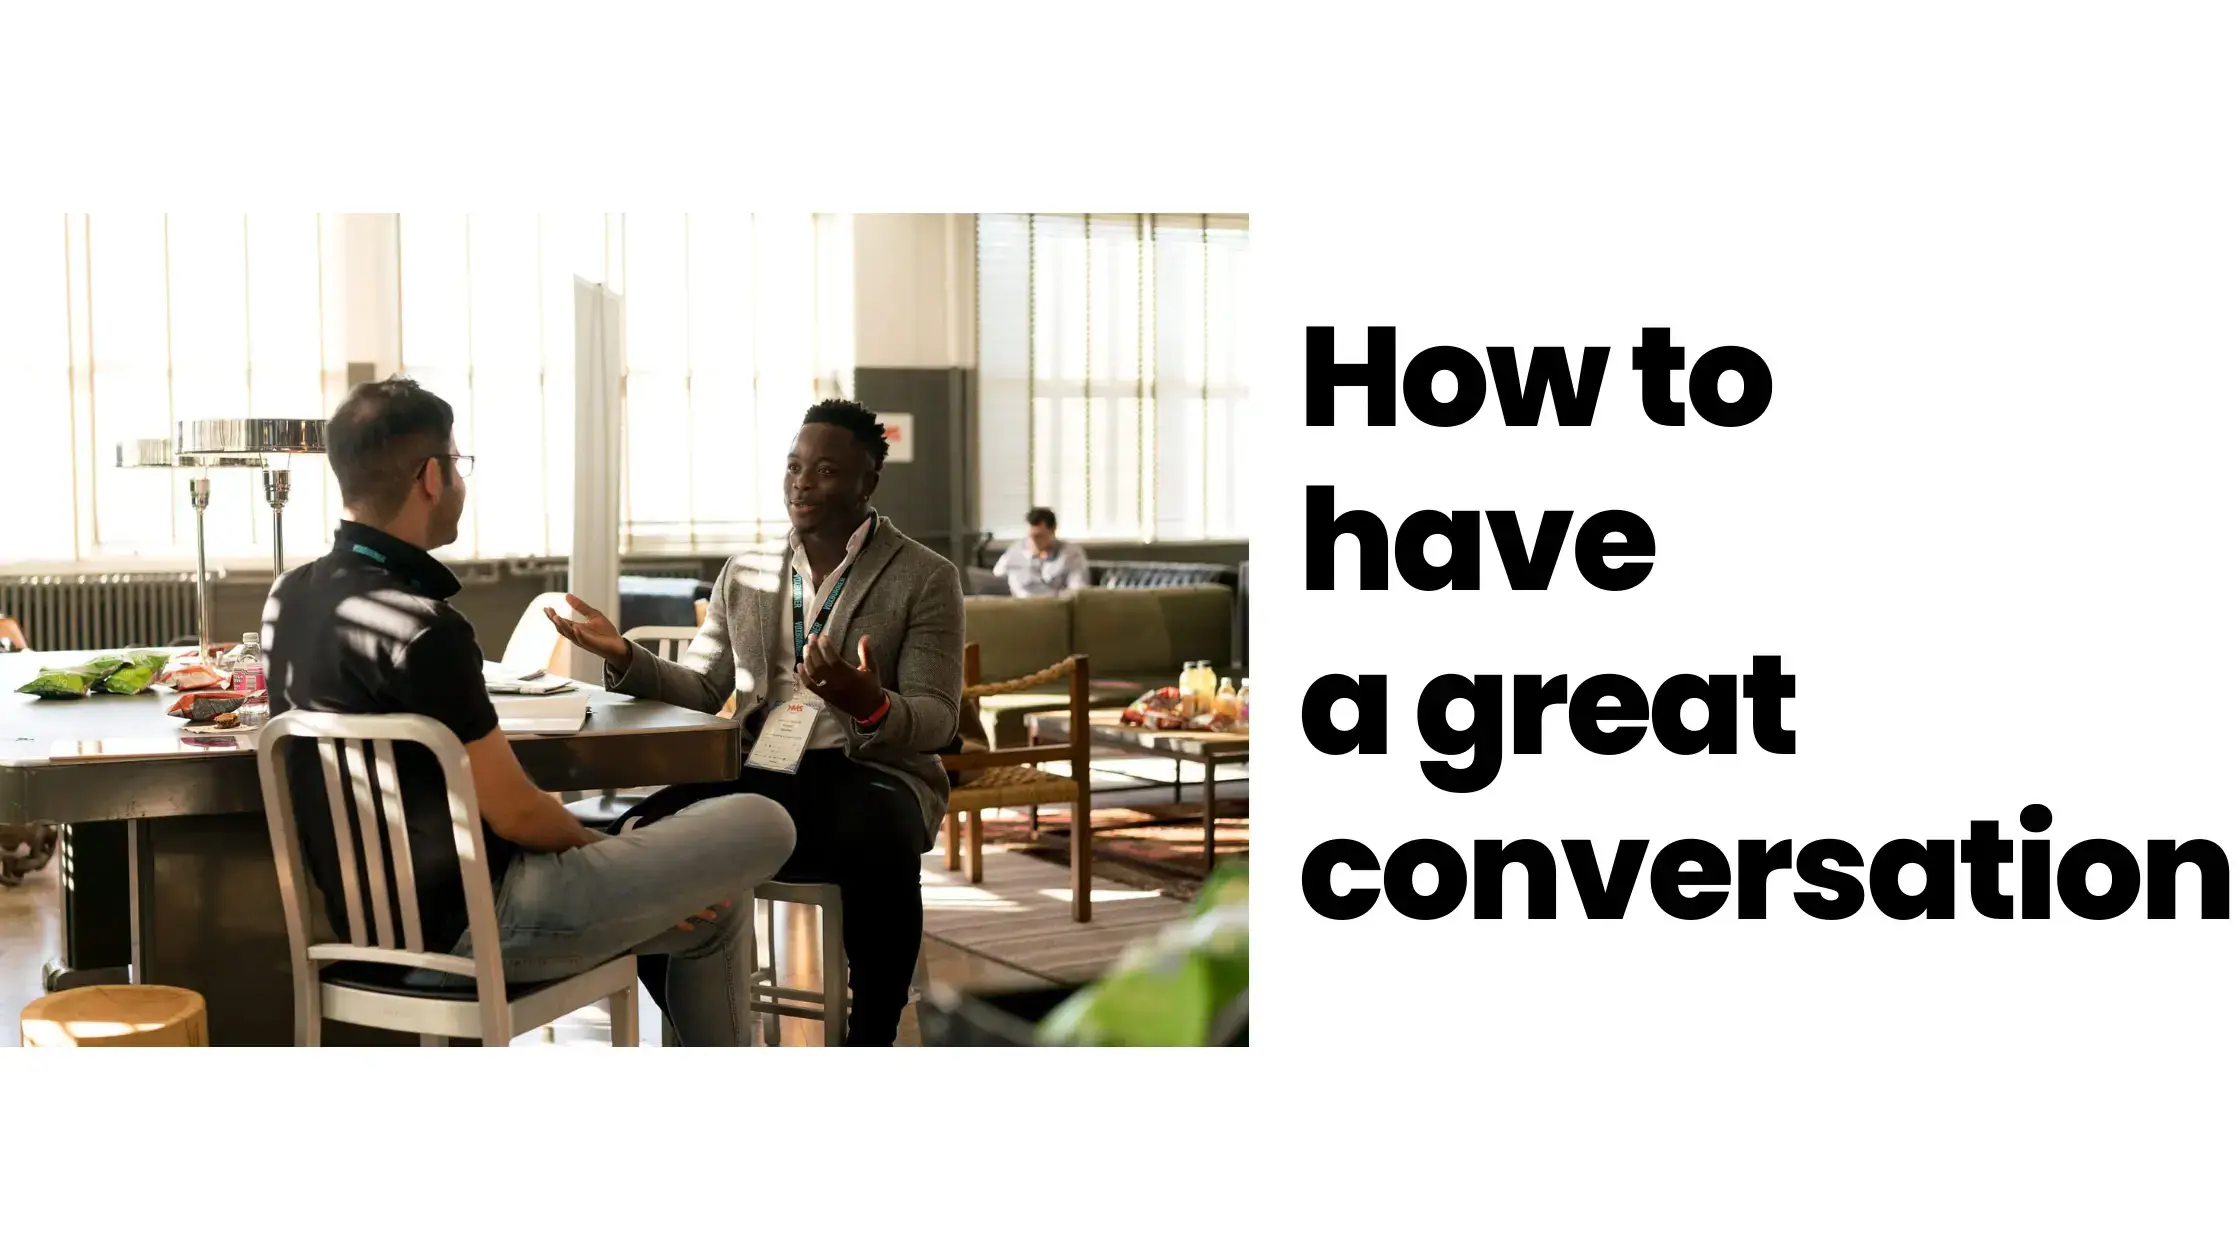 How to have an amazing conversation